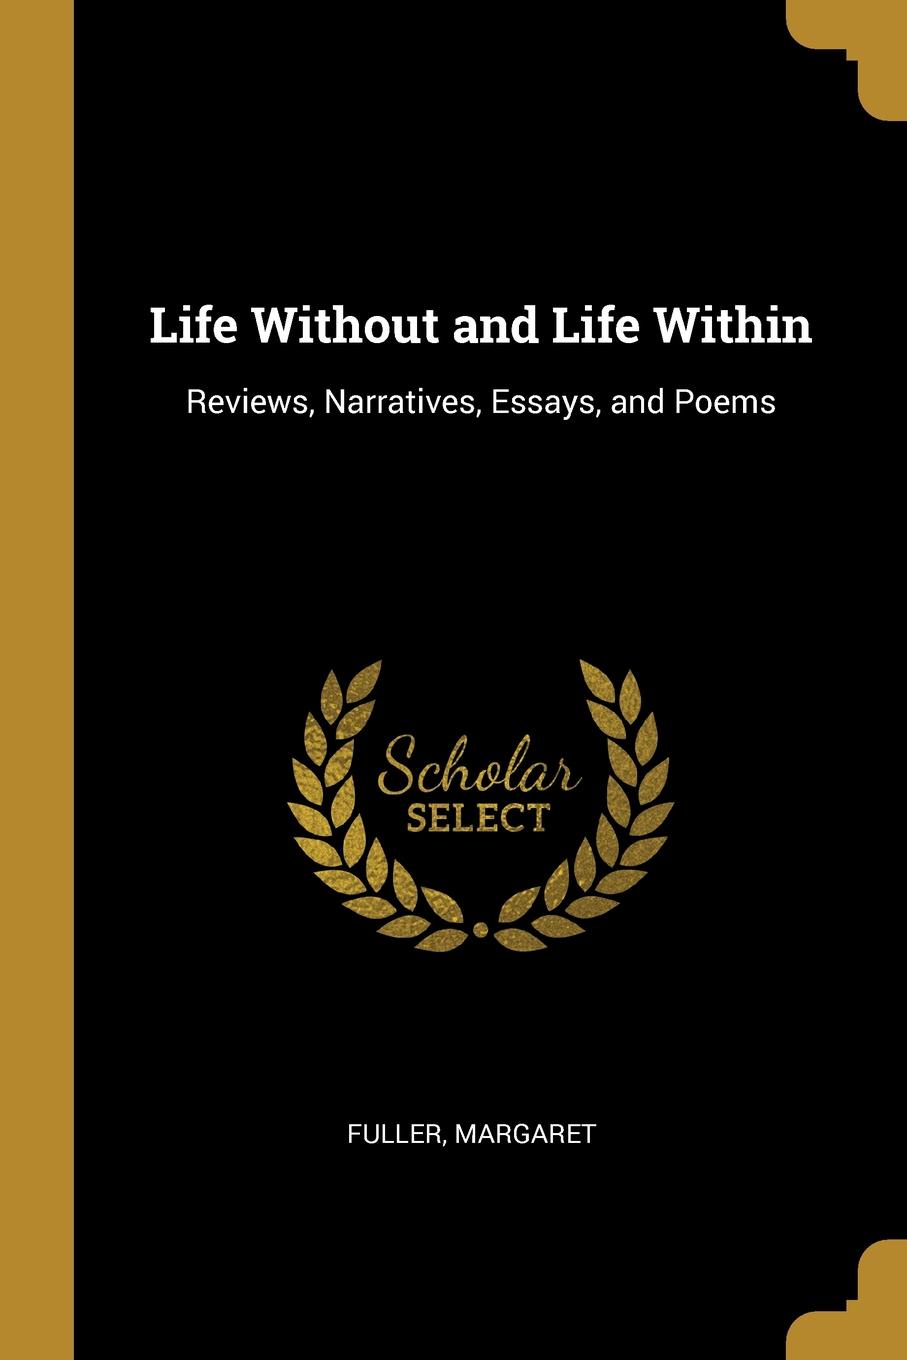 Life Without and Life Within. Reviews, Narratives, Essays, and Poems